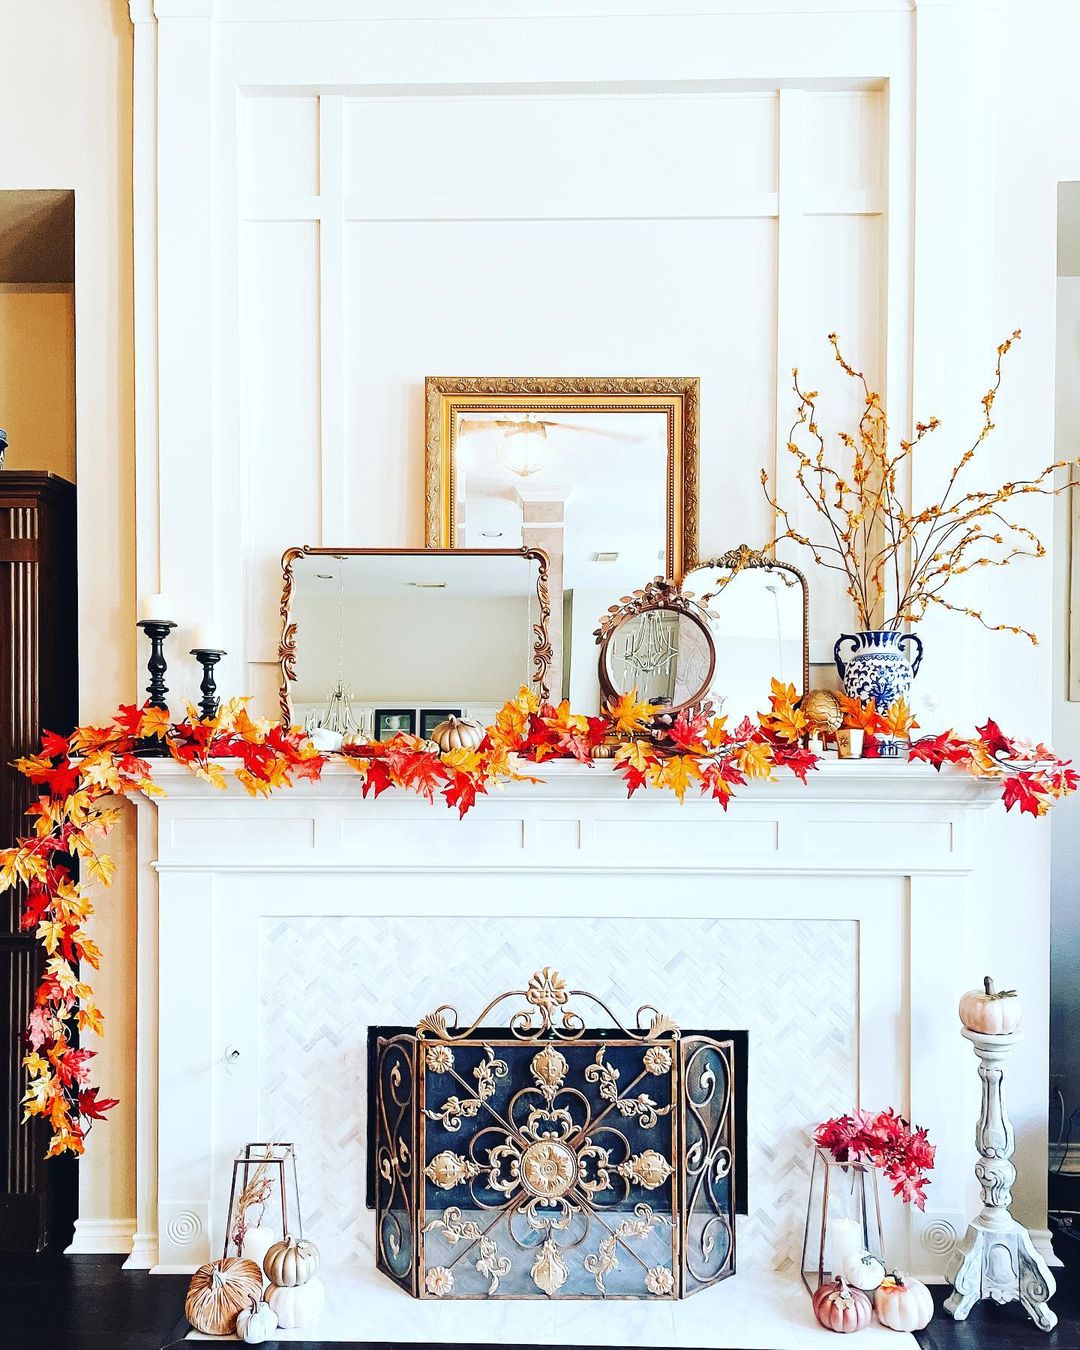 Fall Decor: How to Adorn Your Mantel with Rich Autumnal Hues